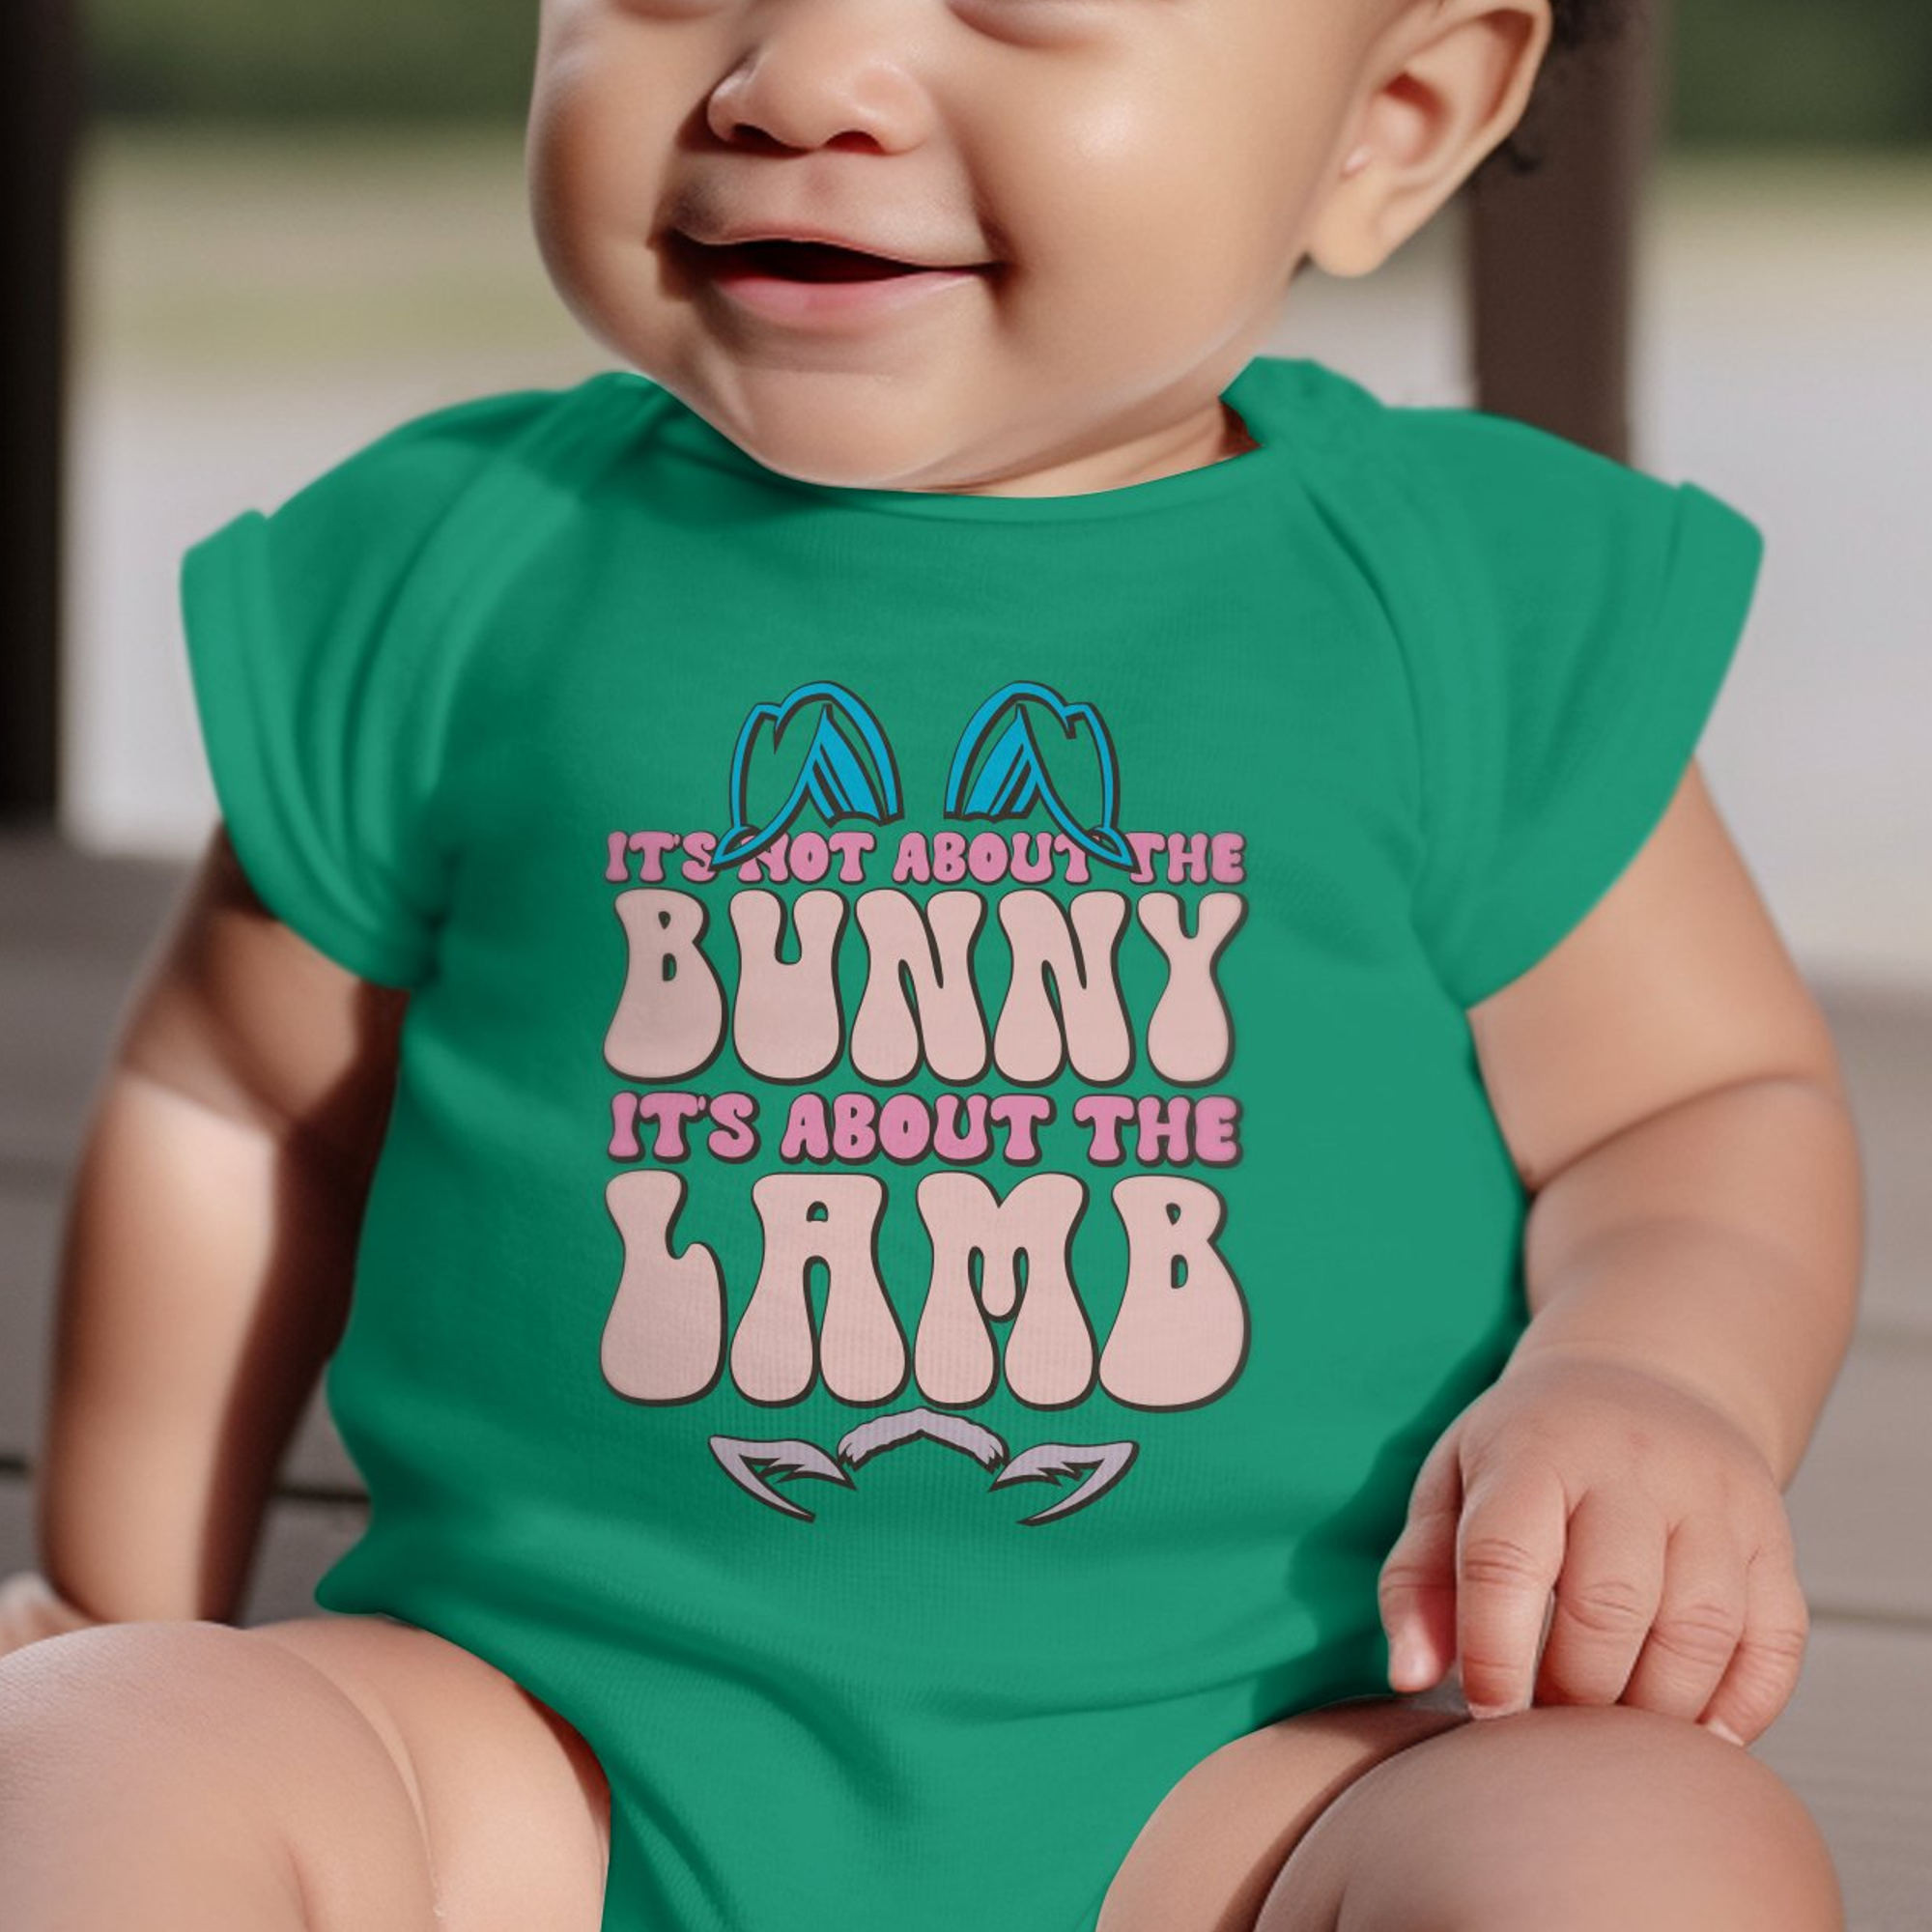 Not About the Bunny Infant Fine Jersey Bodysuit Size: 18mo Color: Navy Jesus Passion Apparel